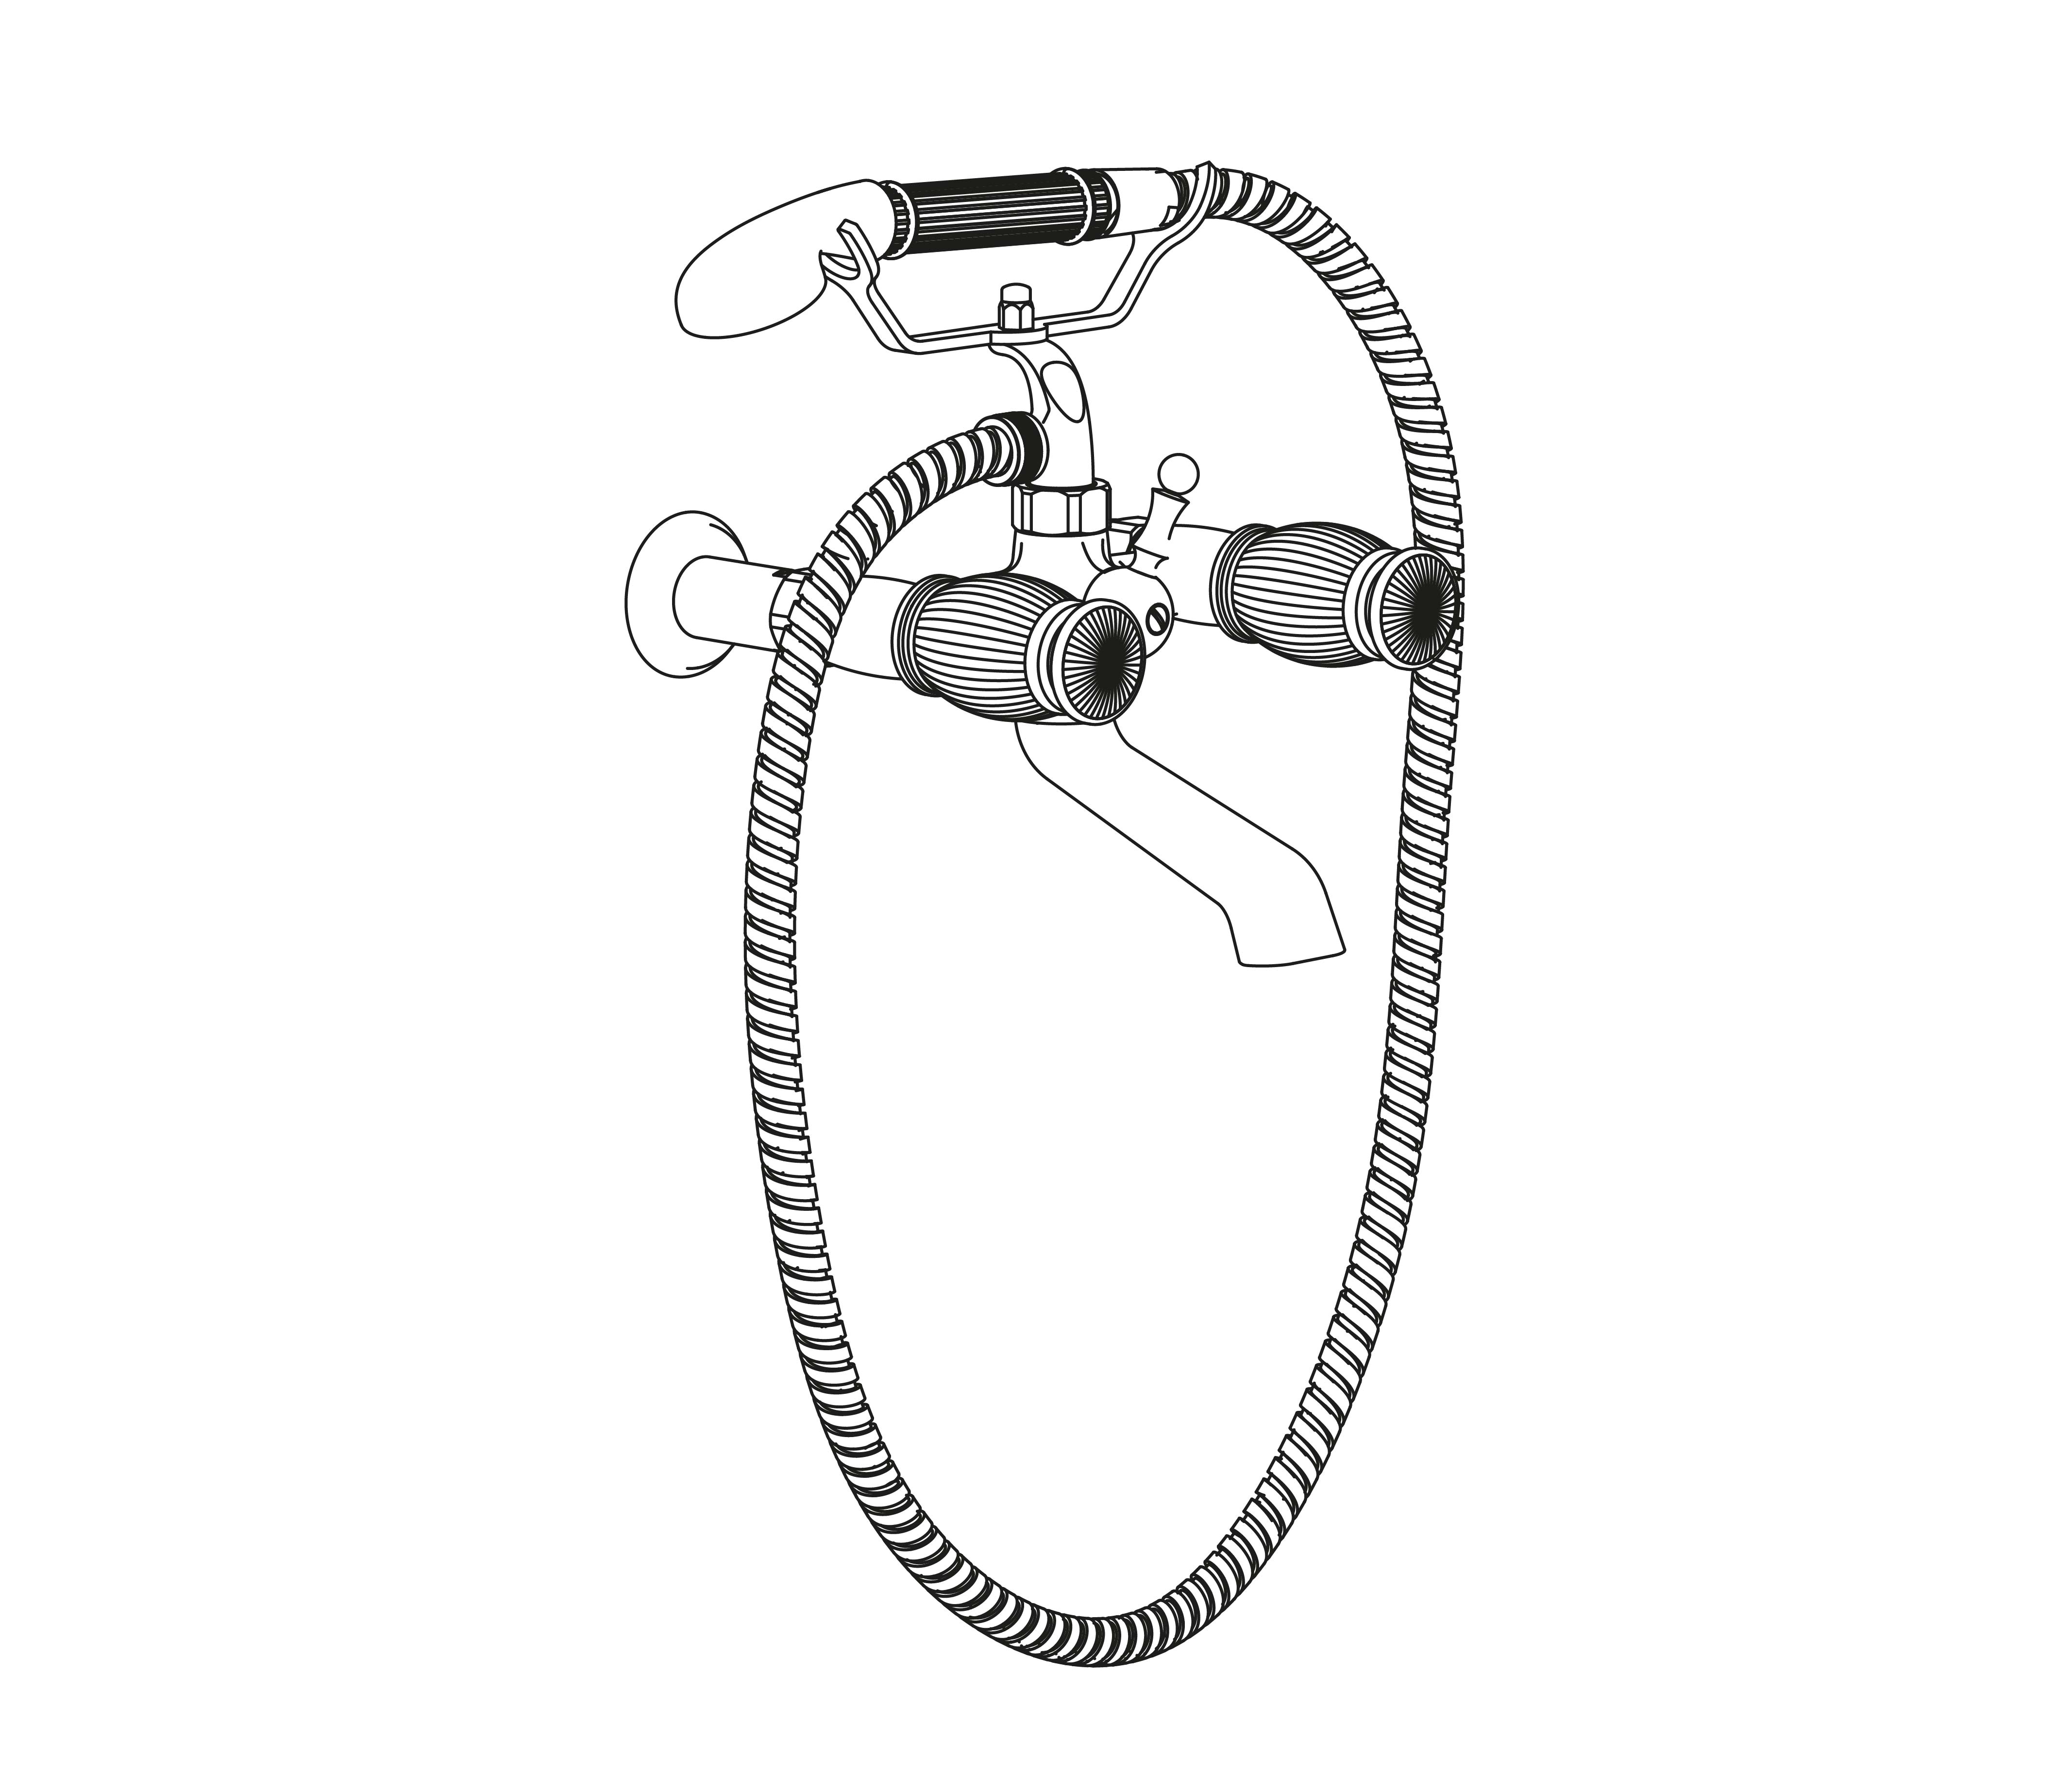 S149-3201 Wall mounted bath and shower mixer